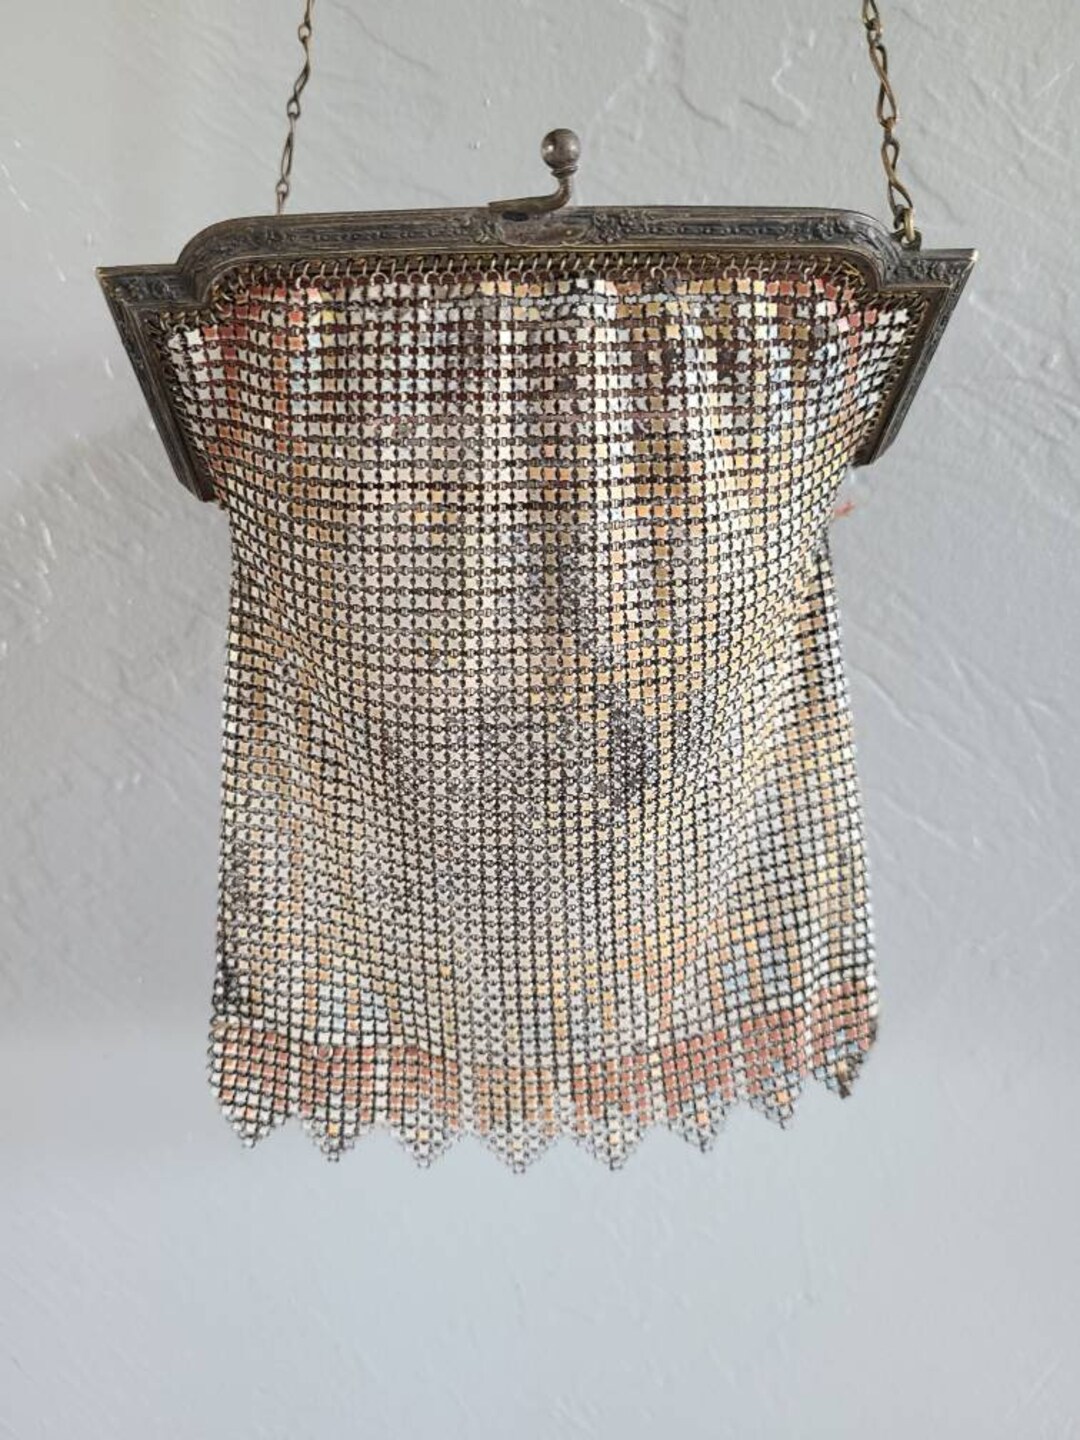 Vintage 1920s Whiting and Davis Colorful Mesh Purse - Raleigh Vintage